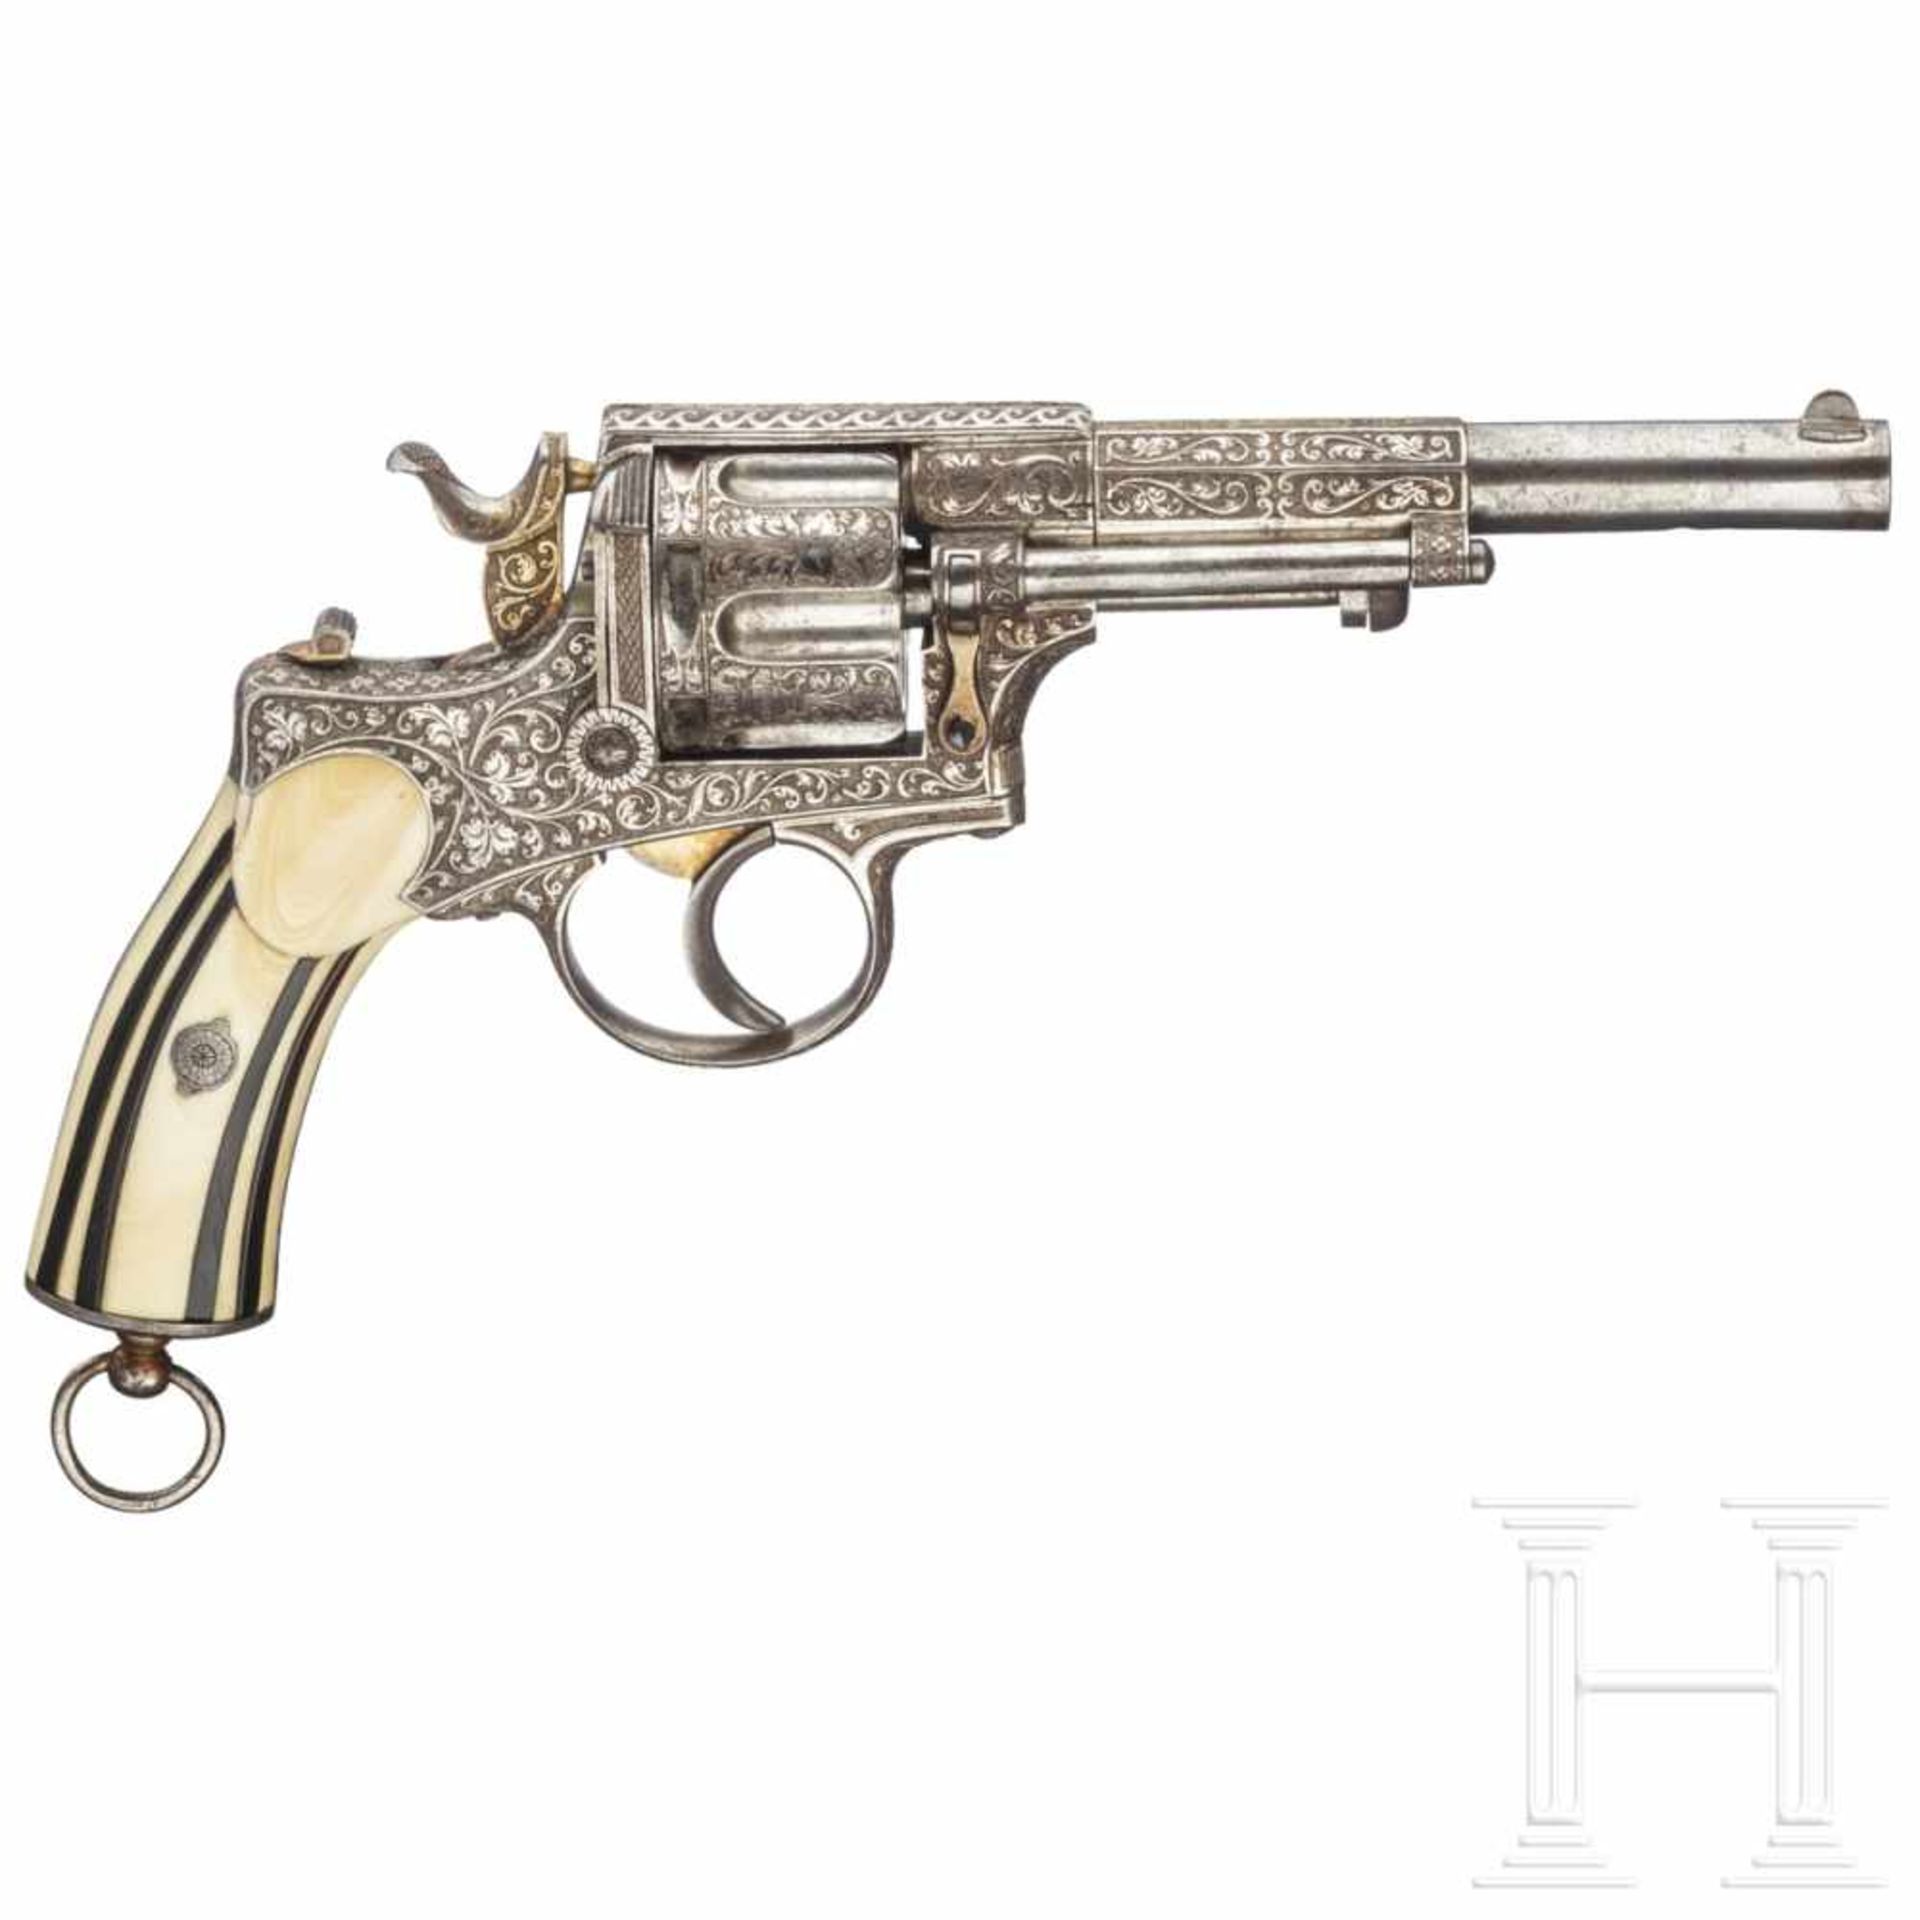 A Revolver Chamelot Delvigne, engraved, nickel-plated, with ivory grips, circa 1872Cal. 9 mm CF, - Bild 2 aus 4